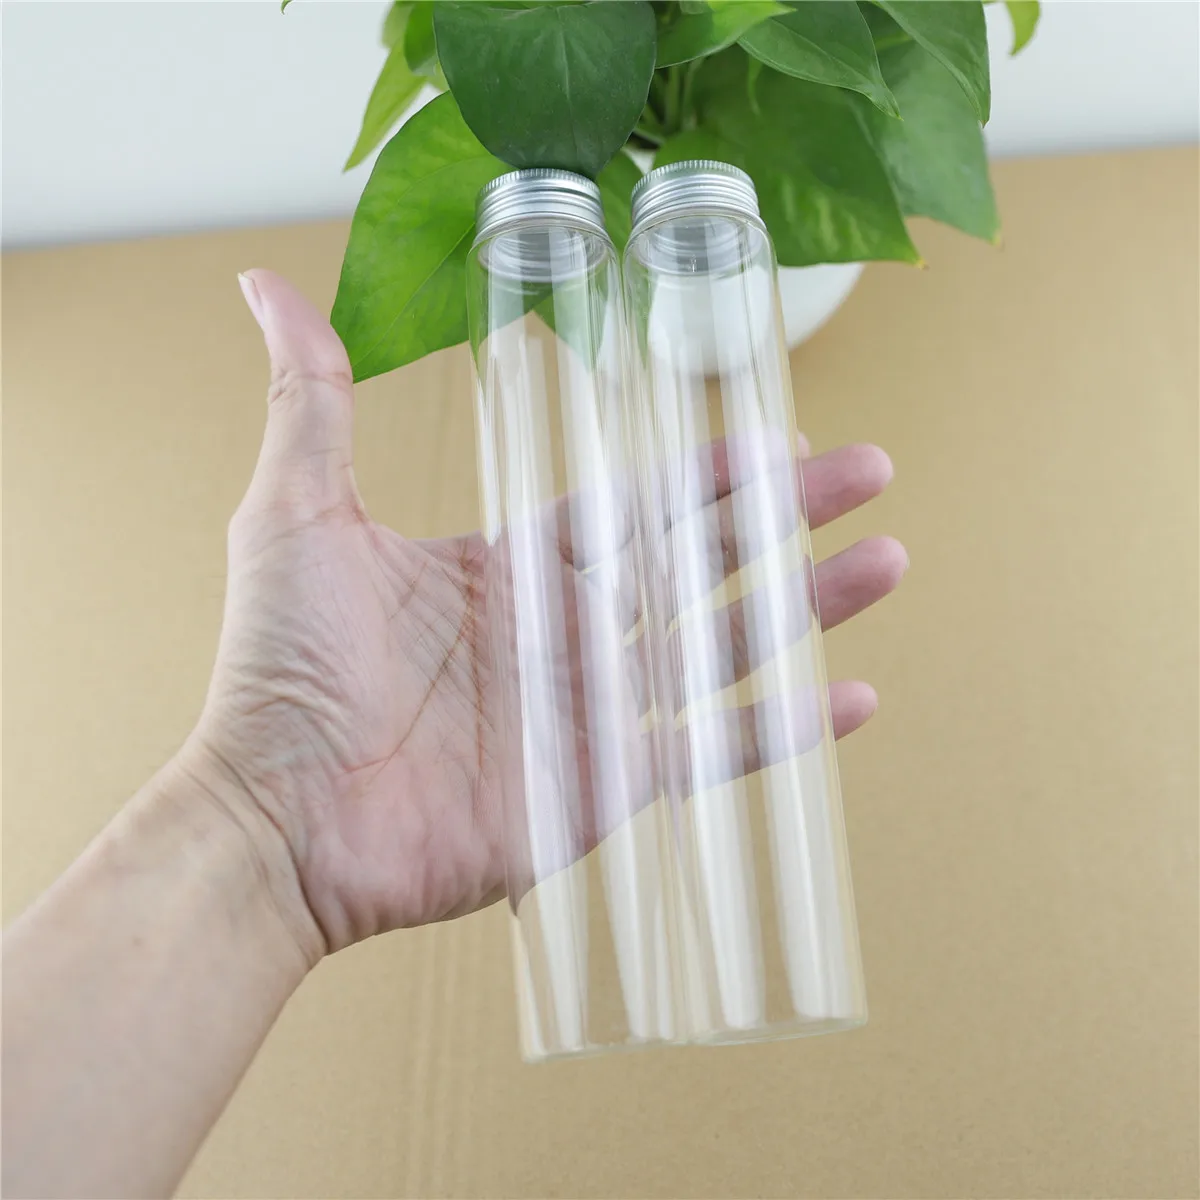 

12pcs/lot 37*200mm 180ml Test Tube Glass Bottle Empty Jar Container Diy Glass Spice storage bottles & jars Containers